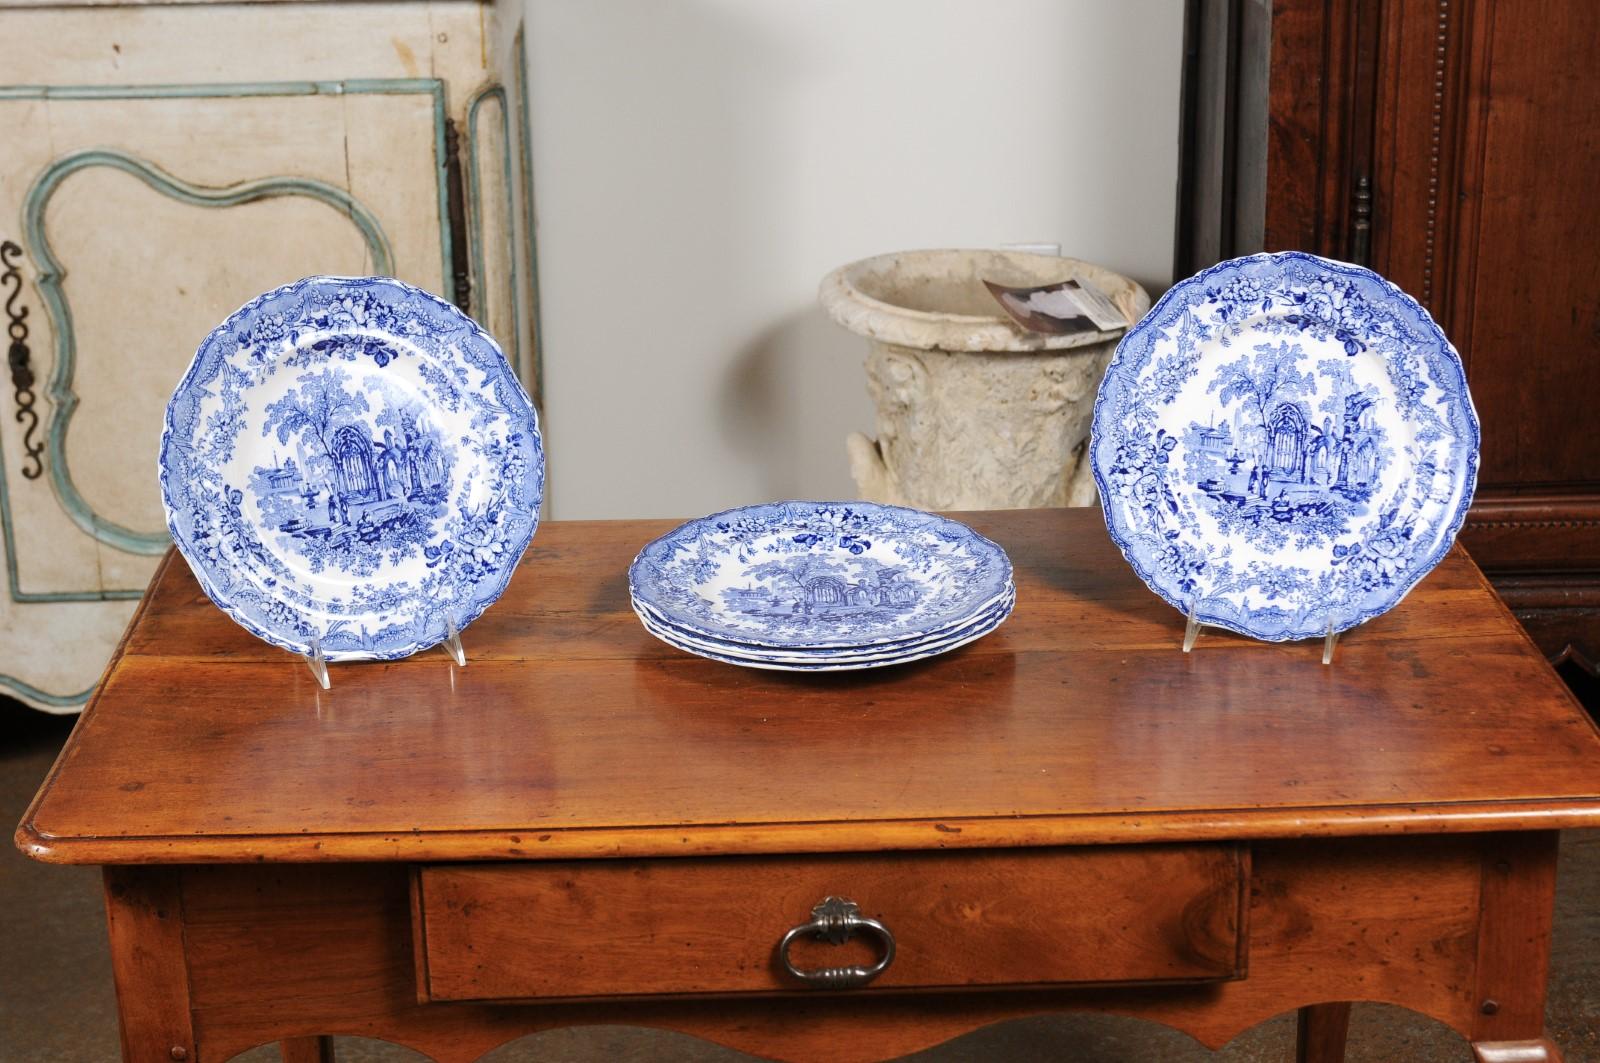 Six English blue and white transferware dinner plates from the 19th century, with Gothic ruins motifs, sold individually. Born in England during the 19th century, each of these six blue and white dinner plates is adorned with a romantic décor